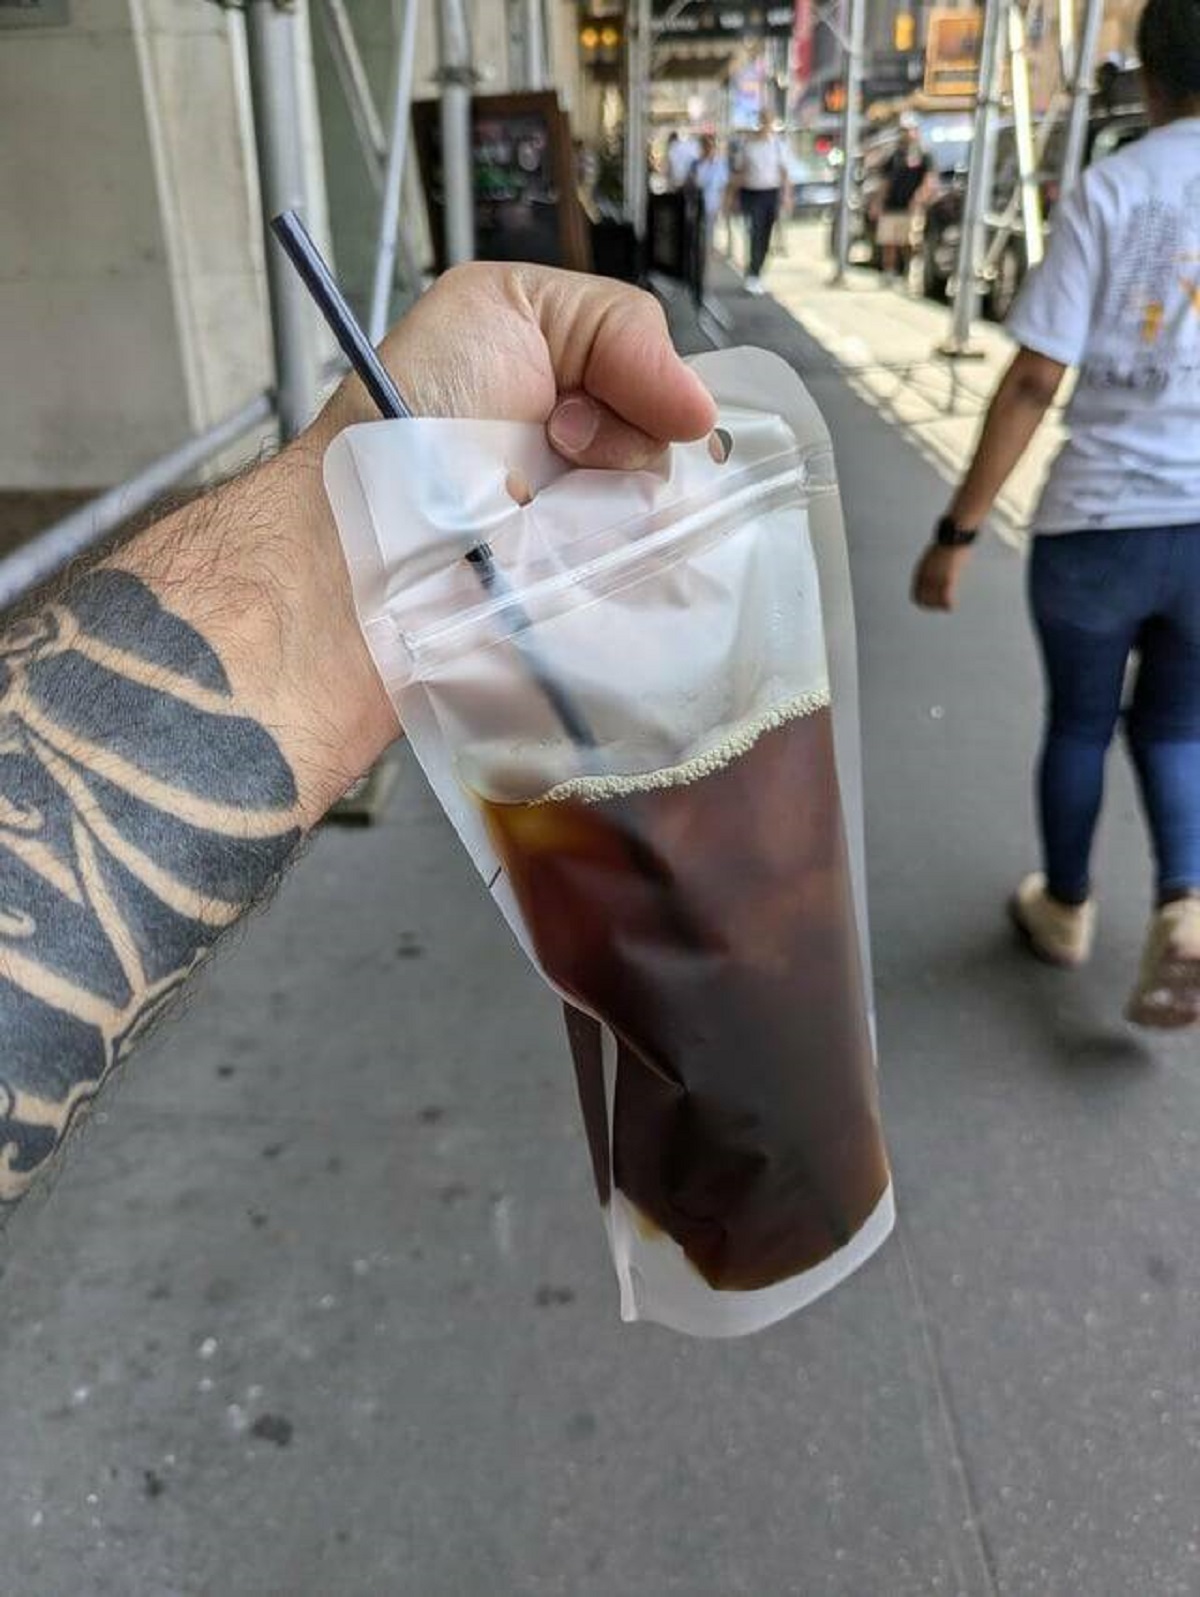 "My cold brew was served to me in a plastic bag."